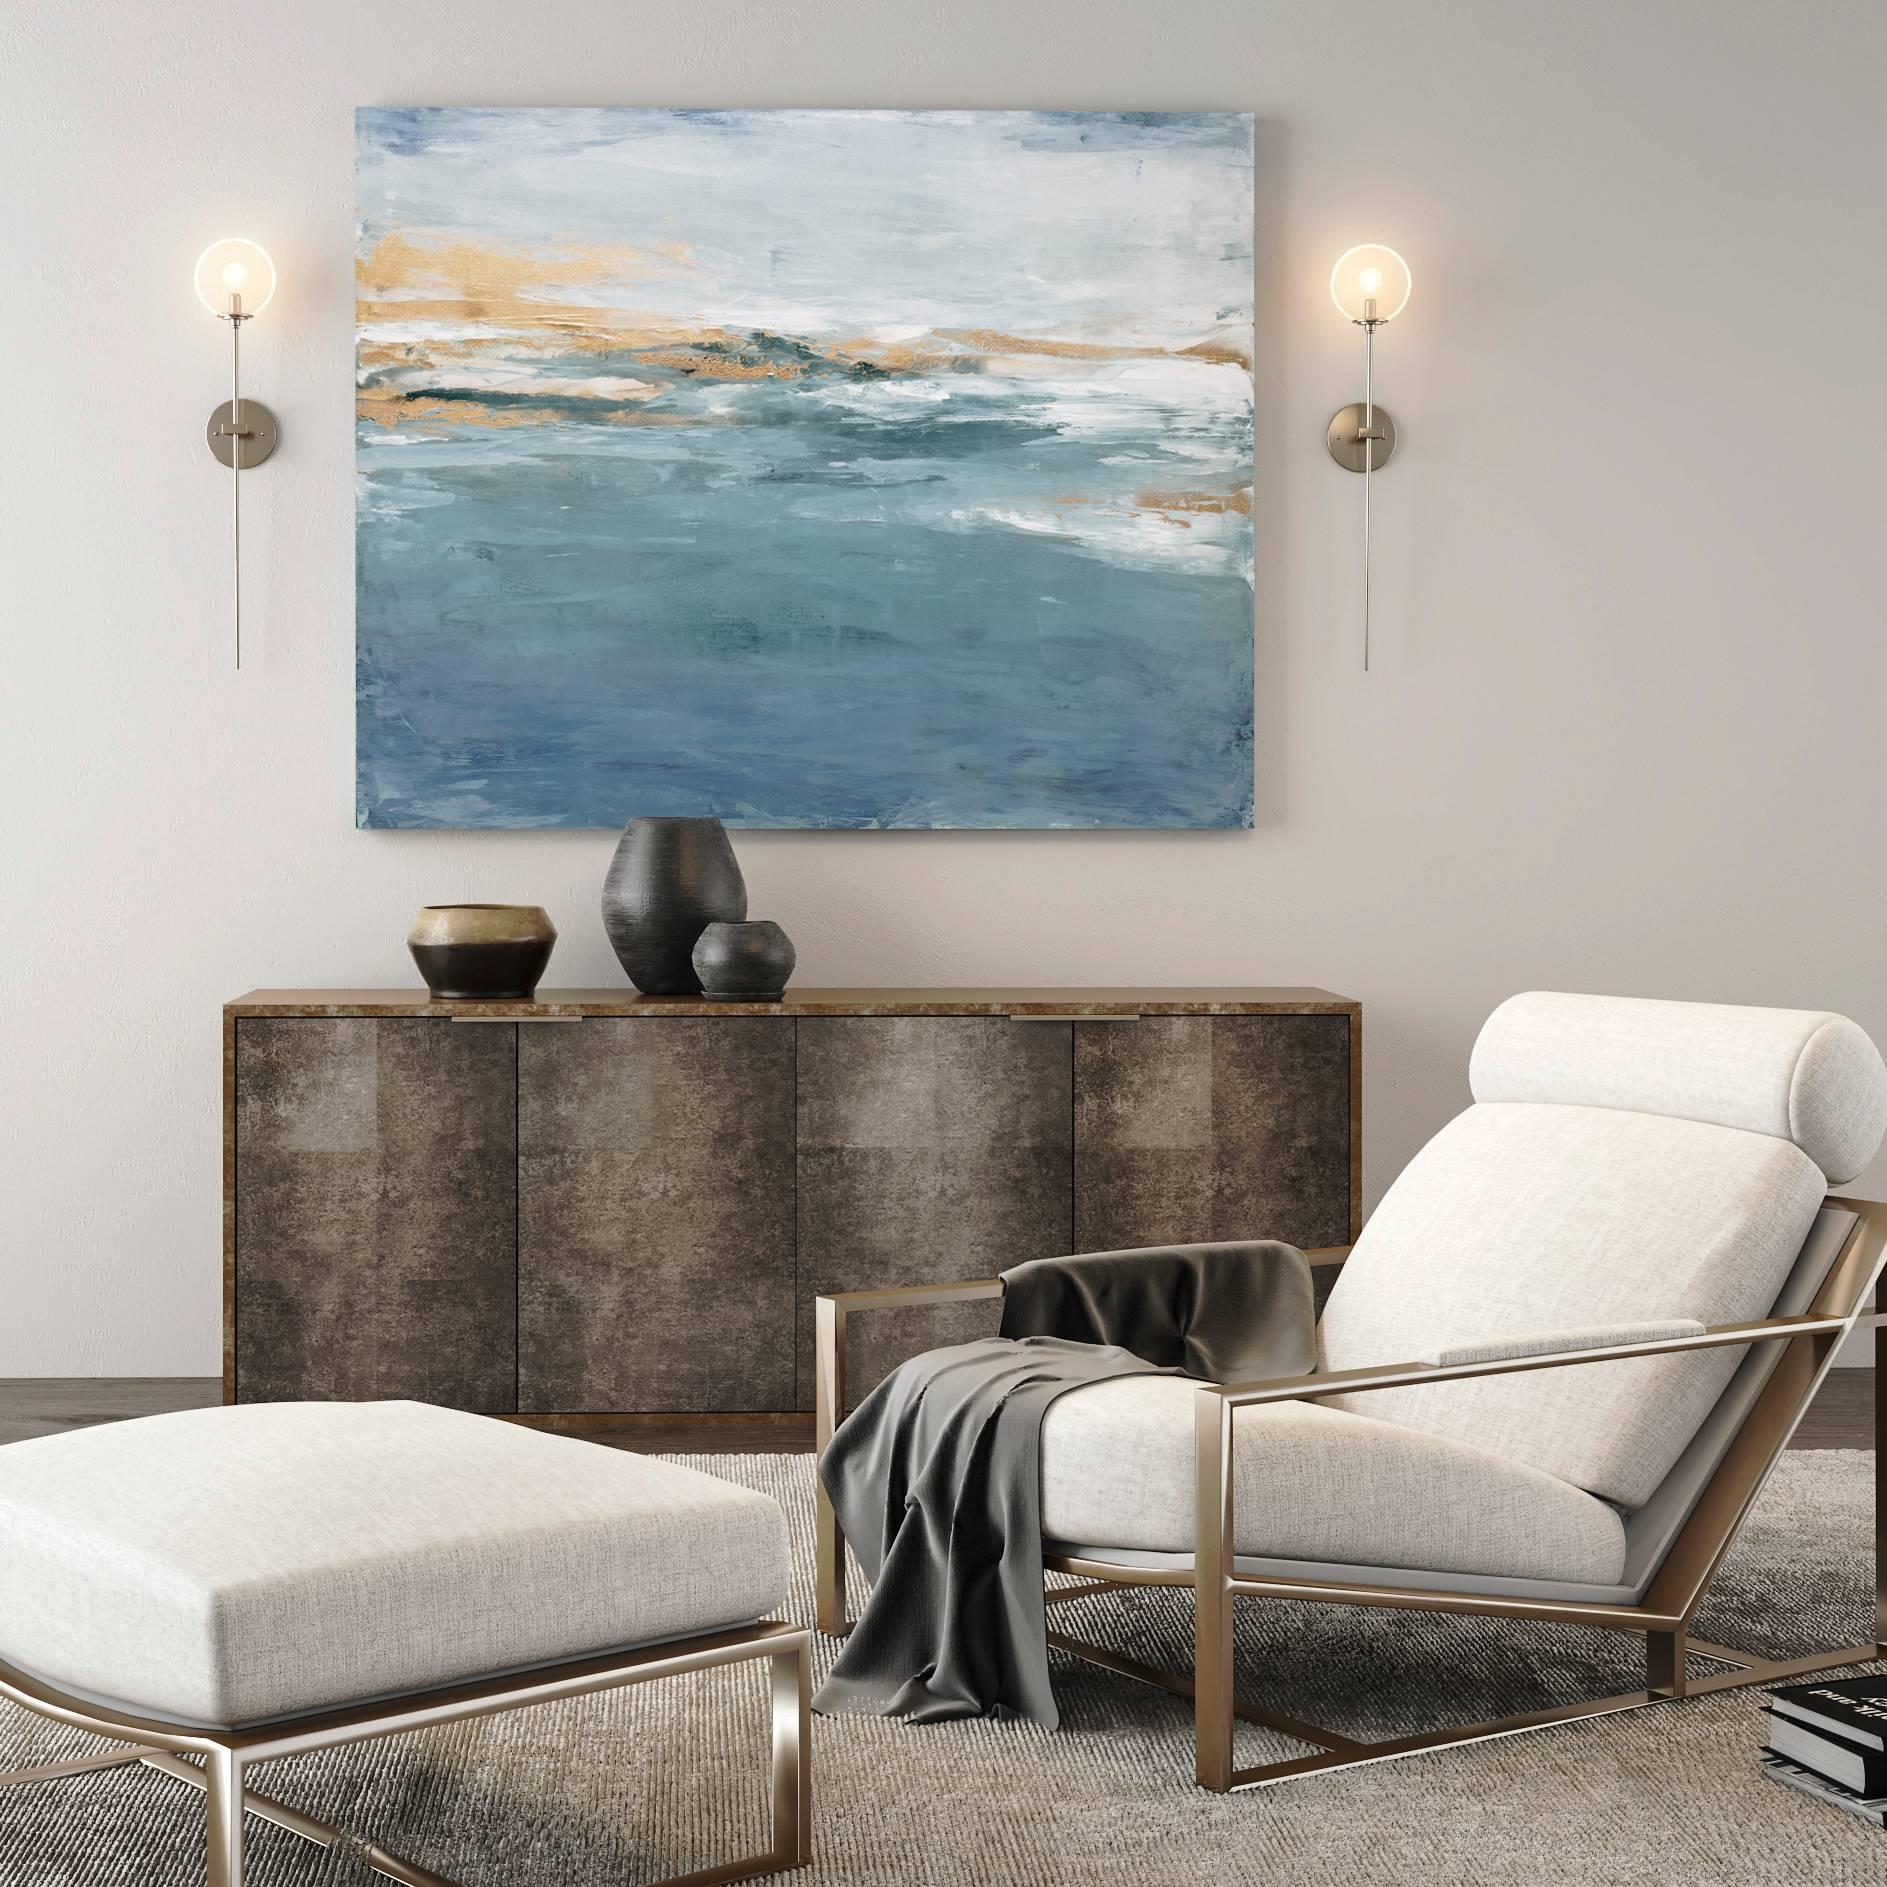 Abstract, navy blue, light blue, gold, white, storm, texture, movement, clouds, celestial, contemporary seascape art, living room art, large scale art

In 2000, Julia earned a Bachelor of Fine Arts degree from Pratt Institute in New York City. Over